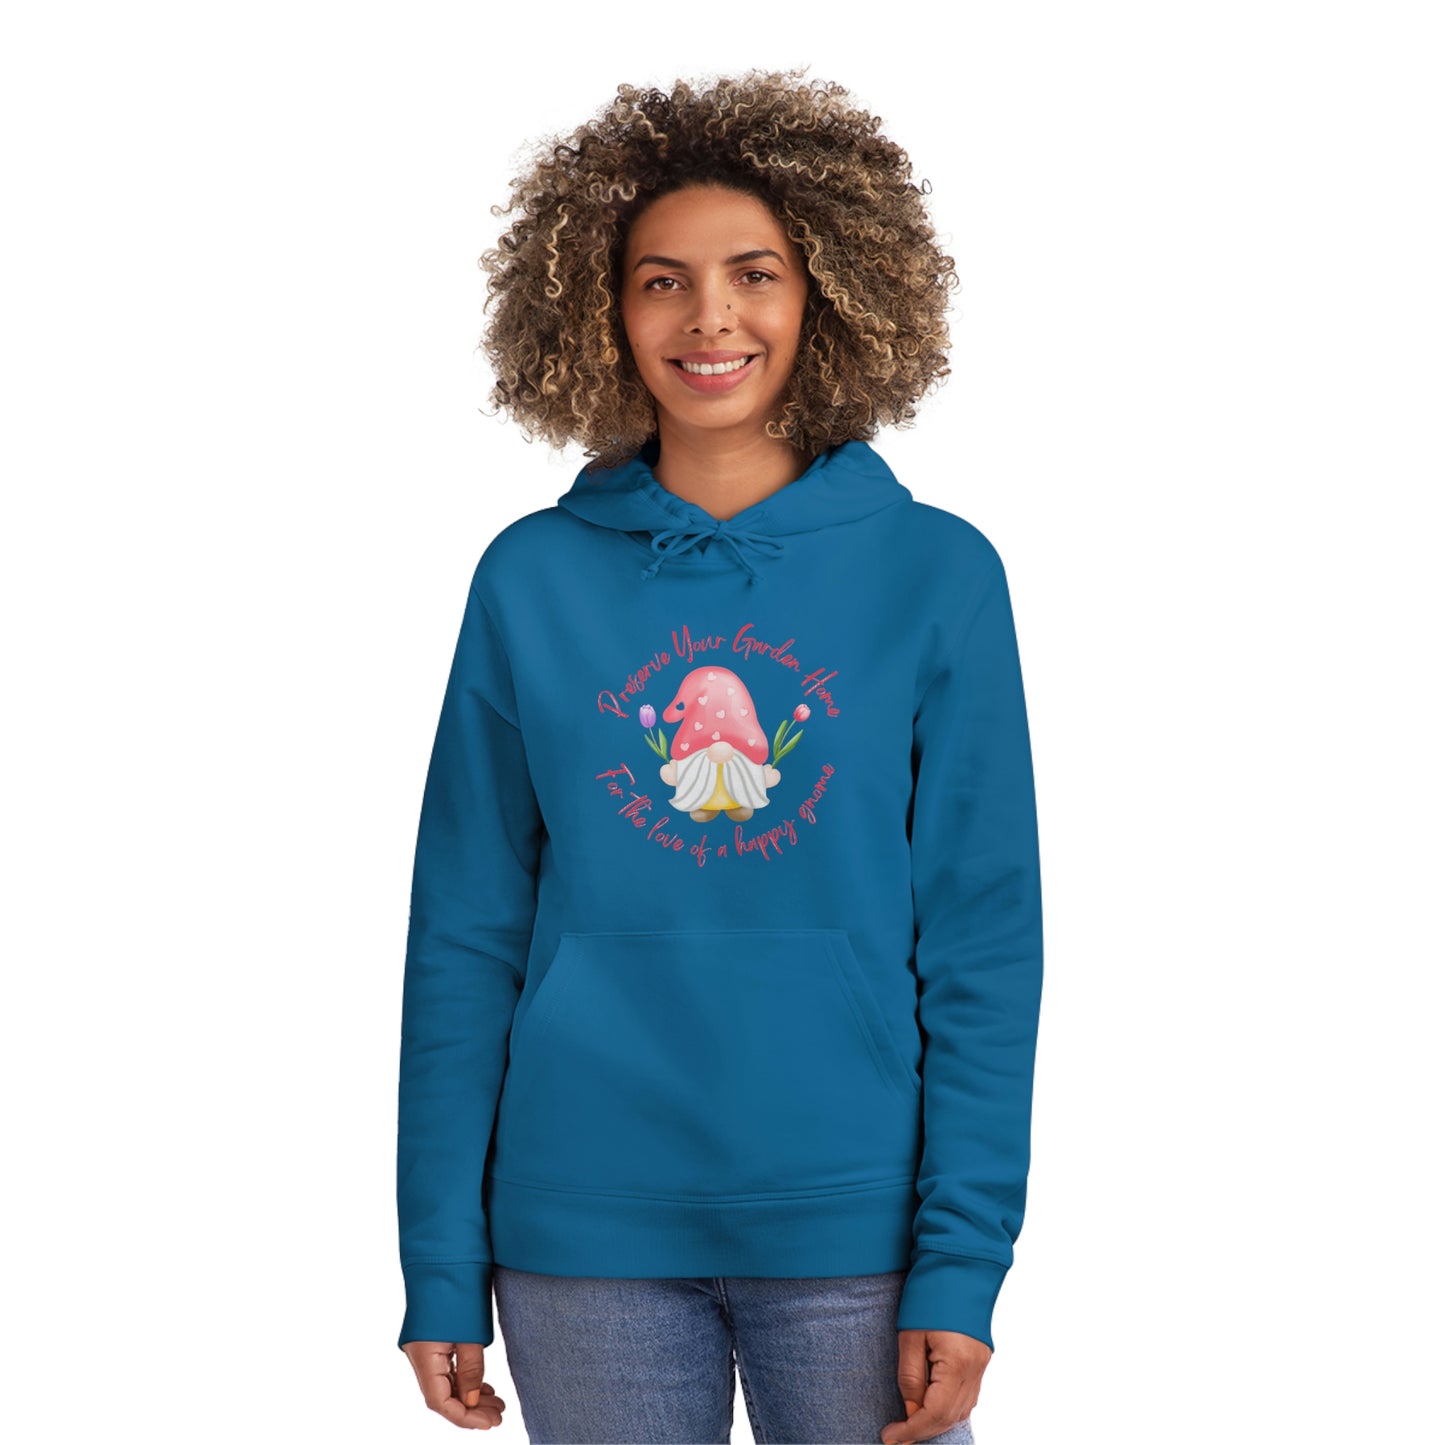 ‘Preserve your garden home, for the love of a happy gnome’ Eco-Friendly. Printed Front & Back. Unisex Drummer Hoodie